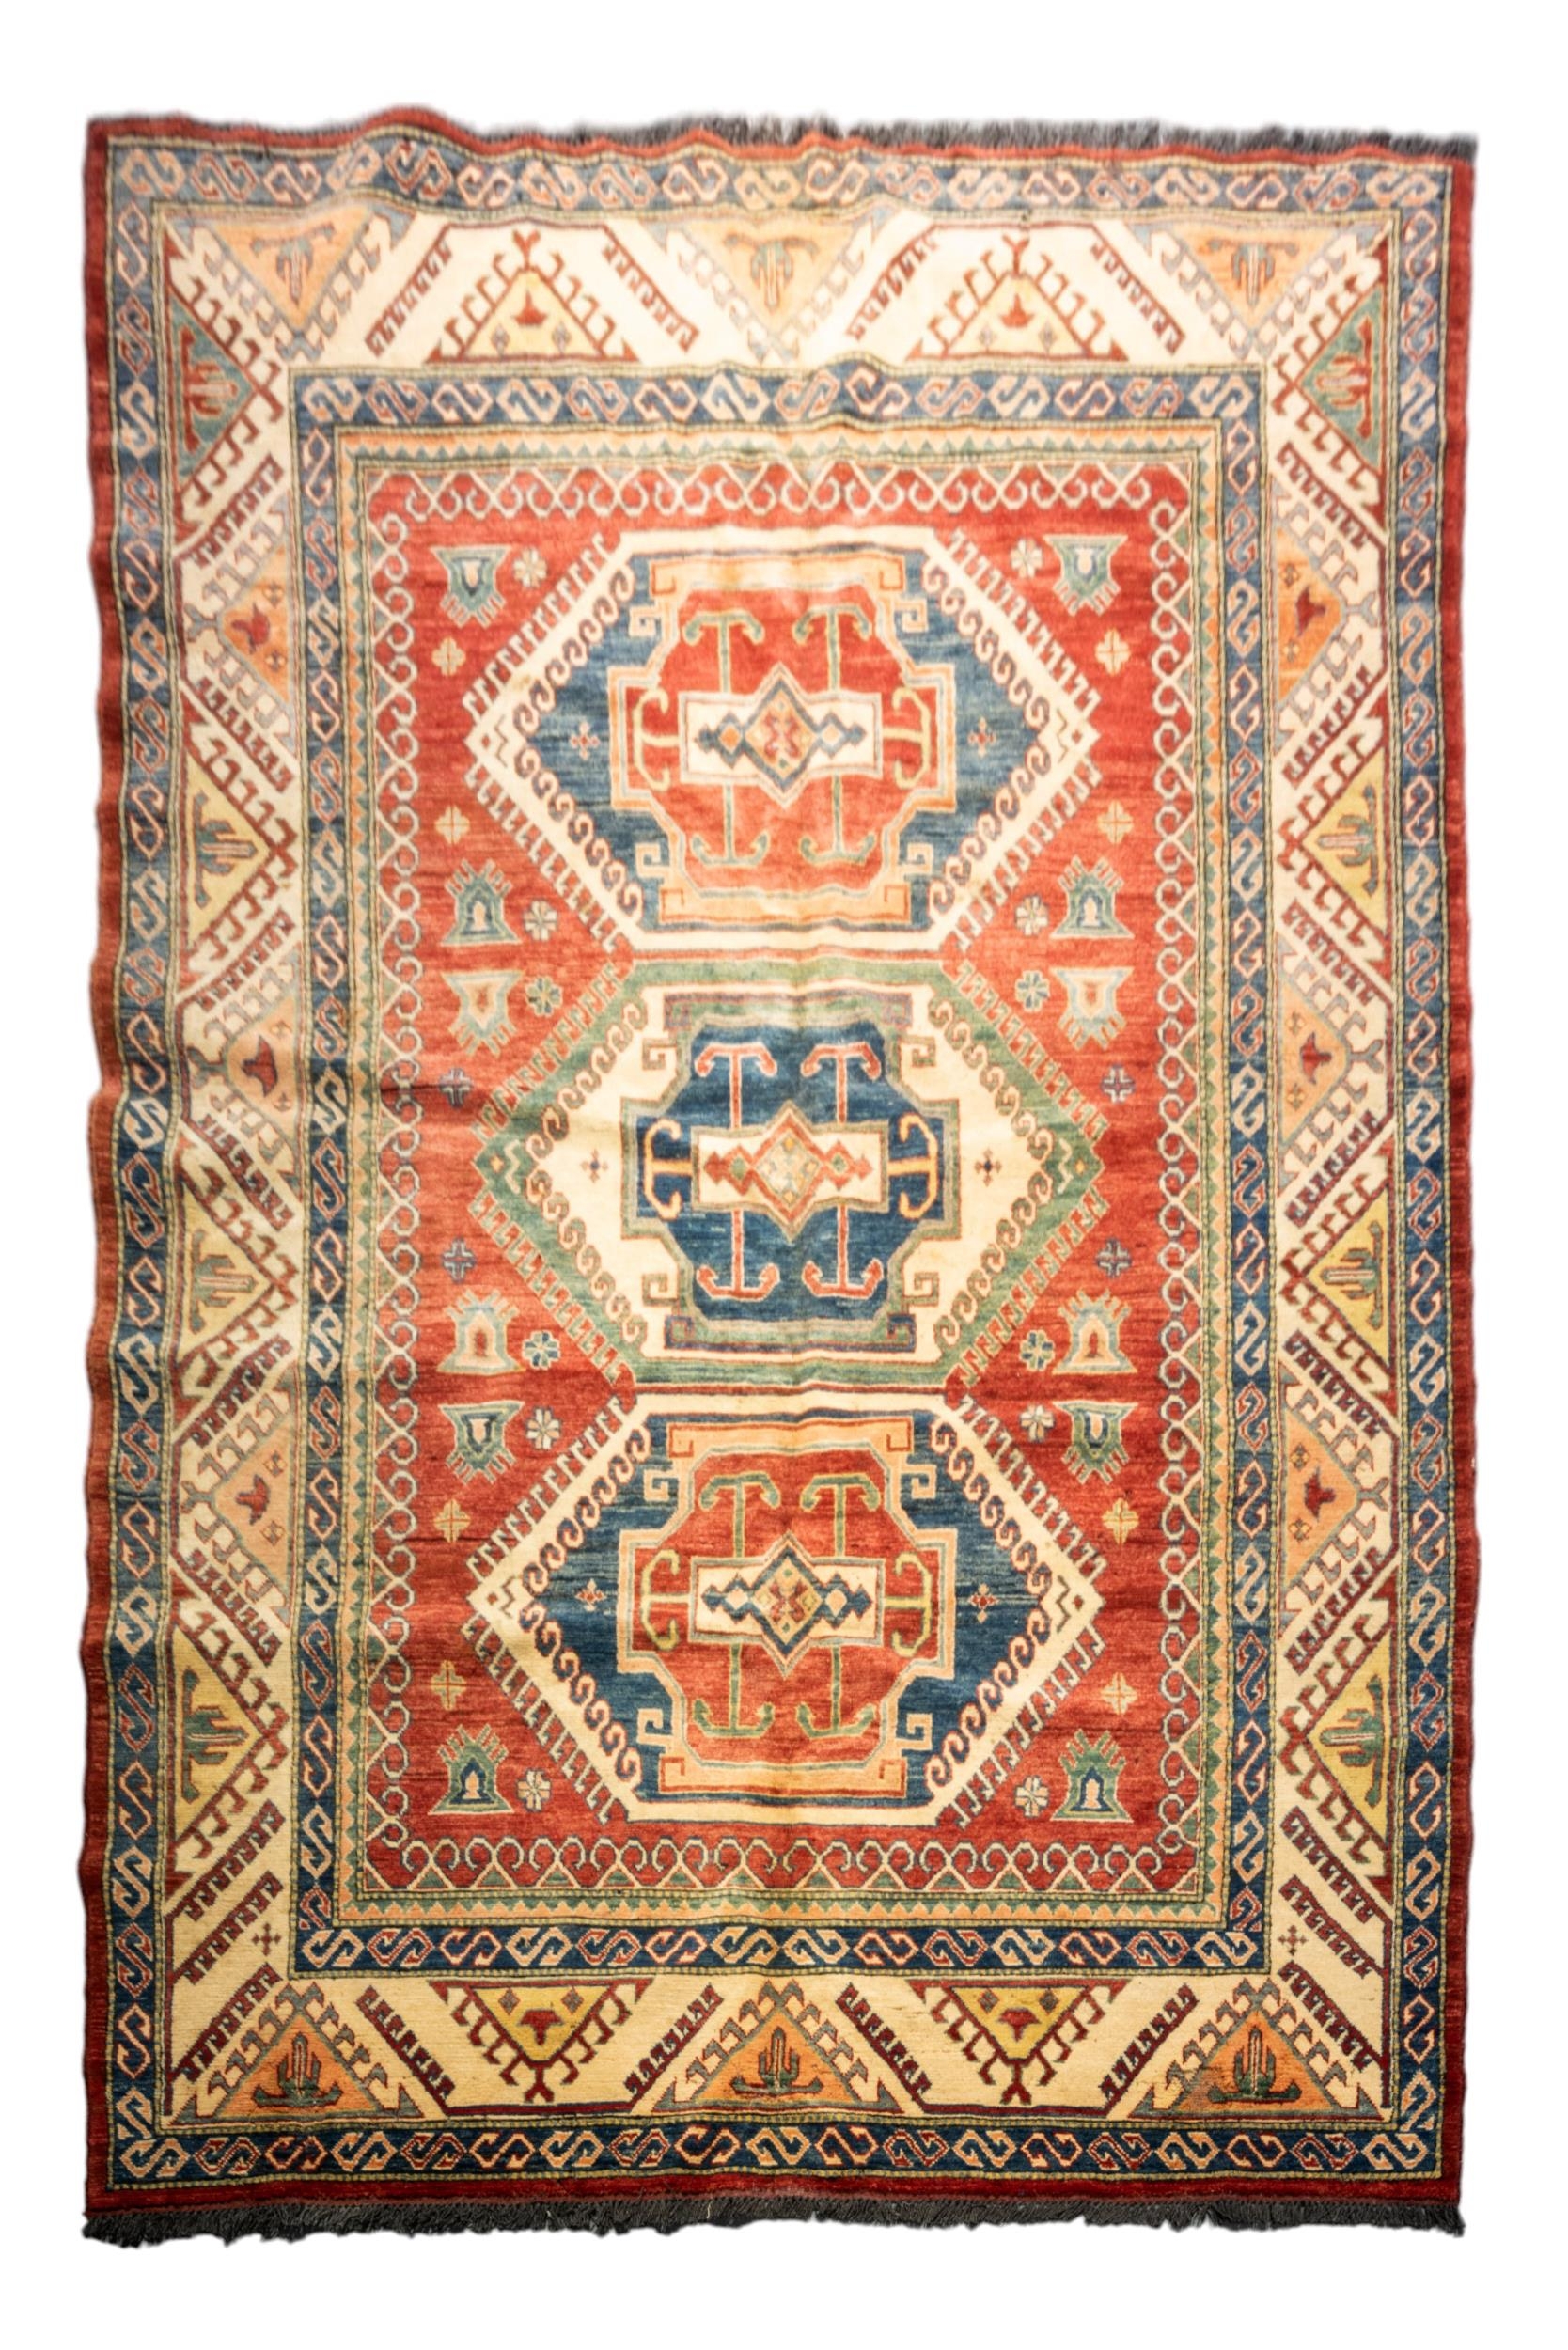 A HAND KNOTTED PERSIAN RUG, MID-LATE 20TH CENTURY, probably Kazhak, small area of damage 332 x 200 - Image 3 of 6